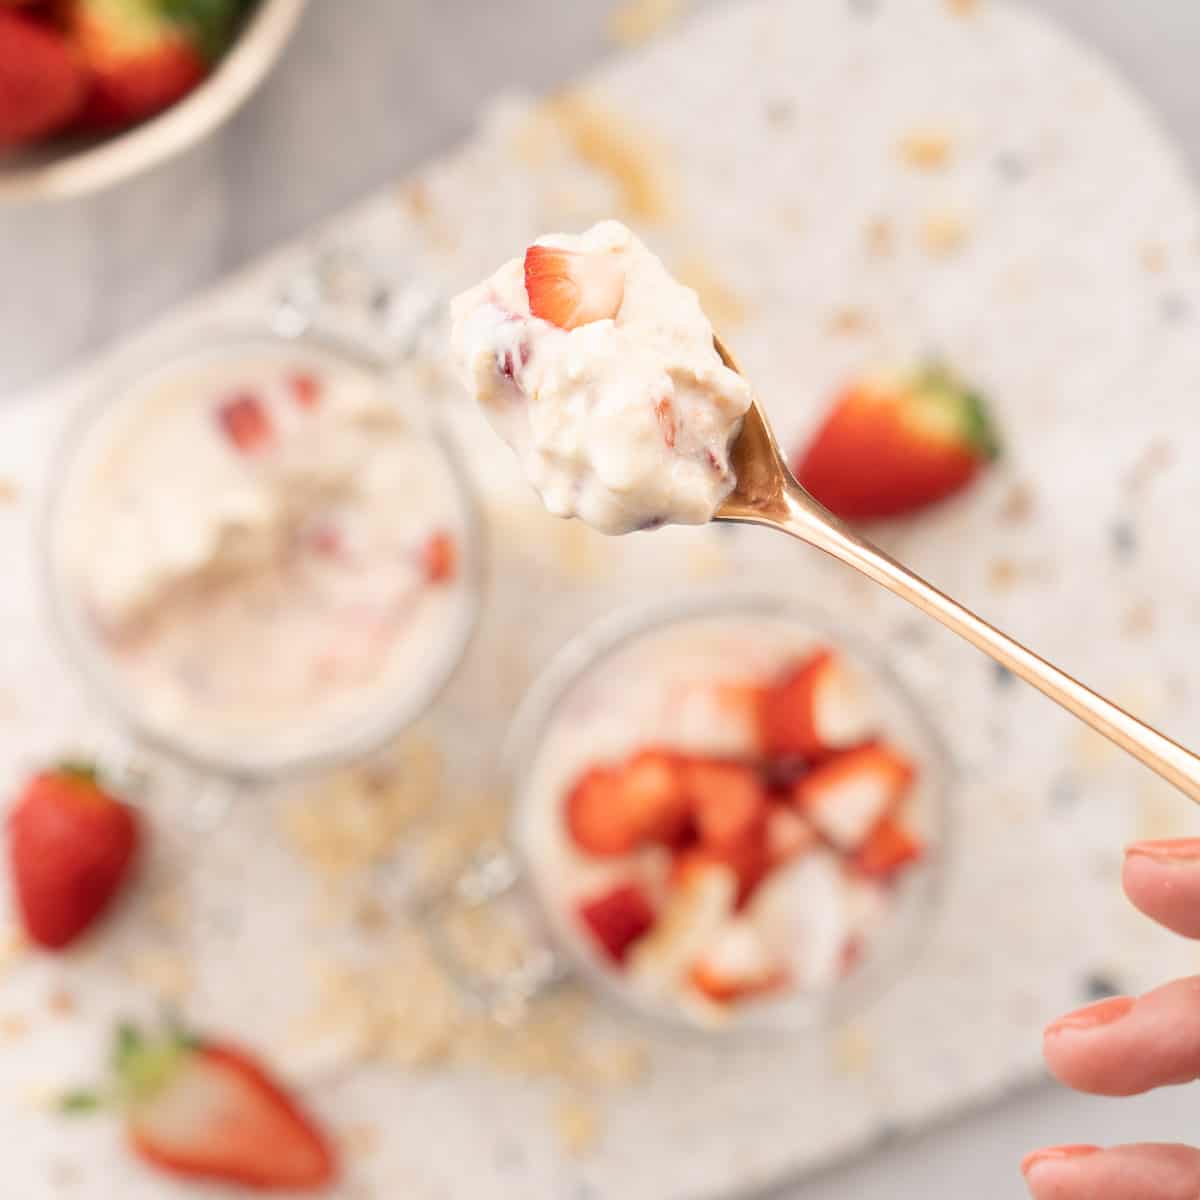 A spoonful of strawberry overnight oats being held up to the camera, creamy oats and chunks of strawberry visible/